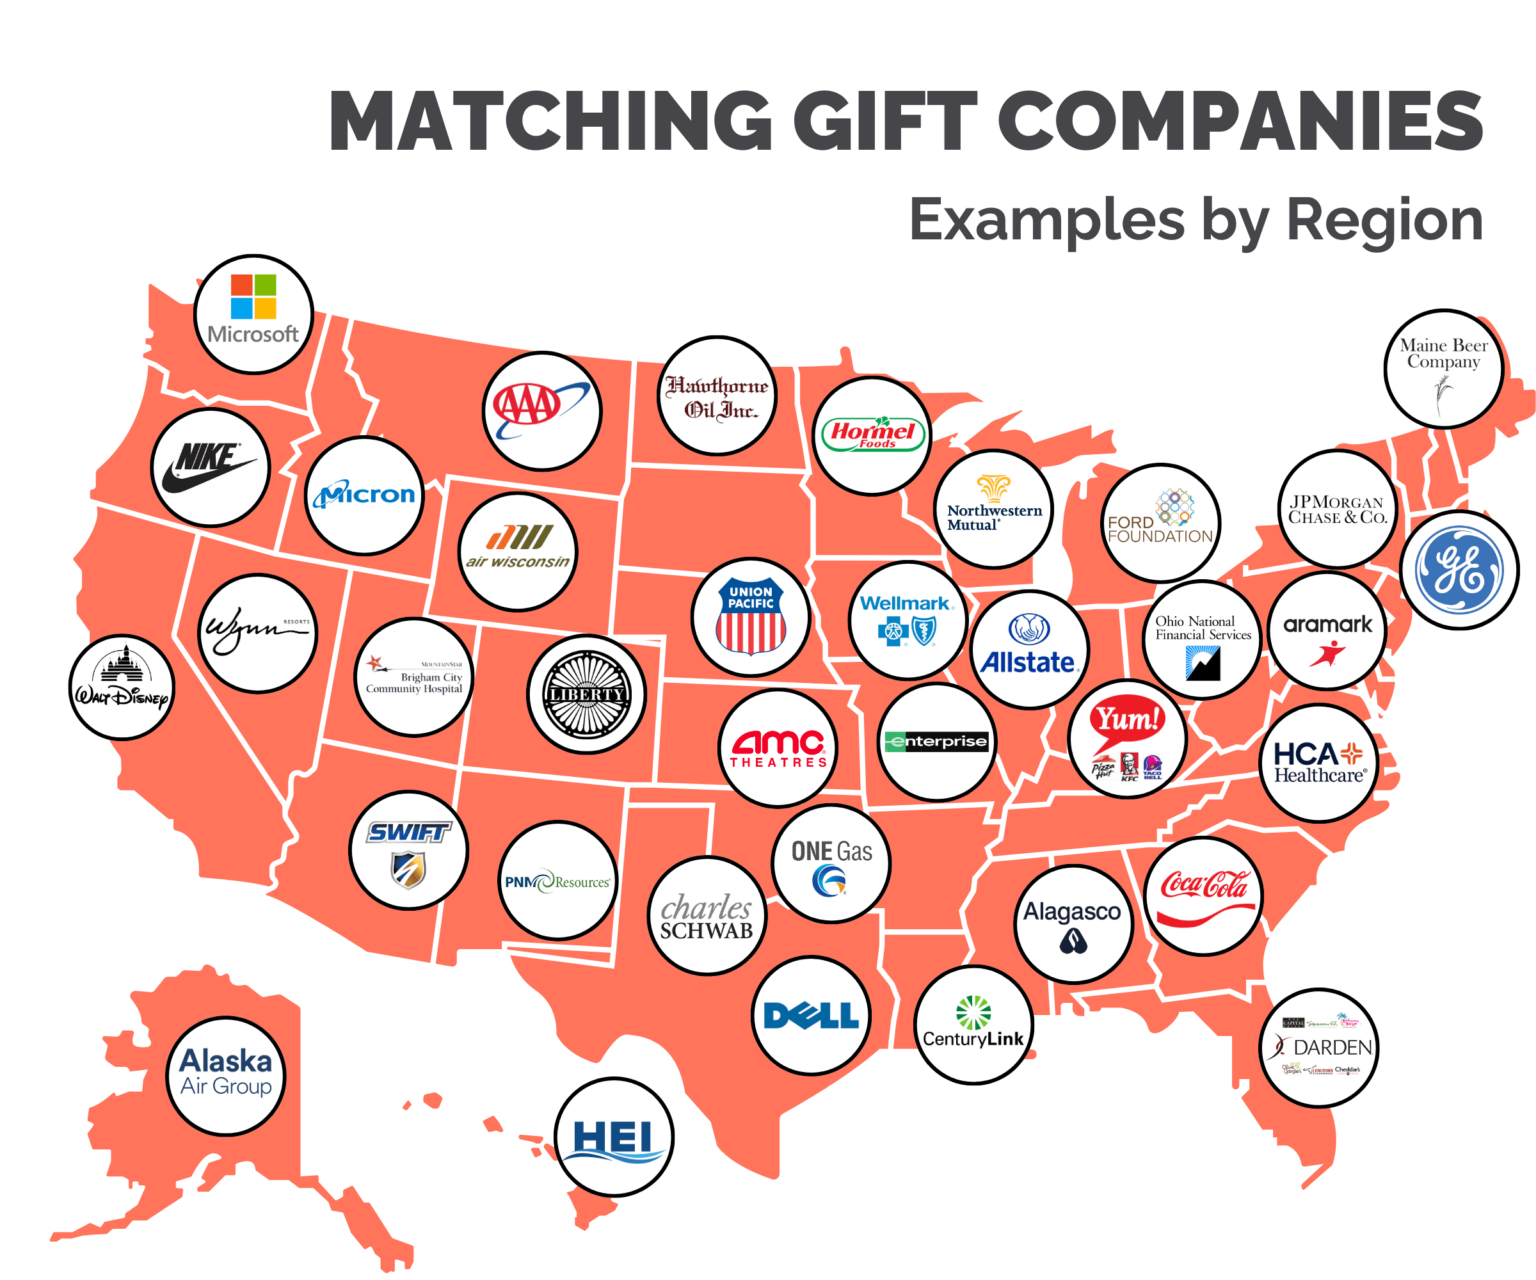 Matching gift geographical breakdown across the US